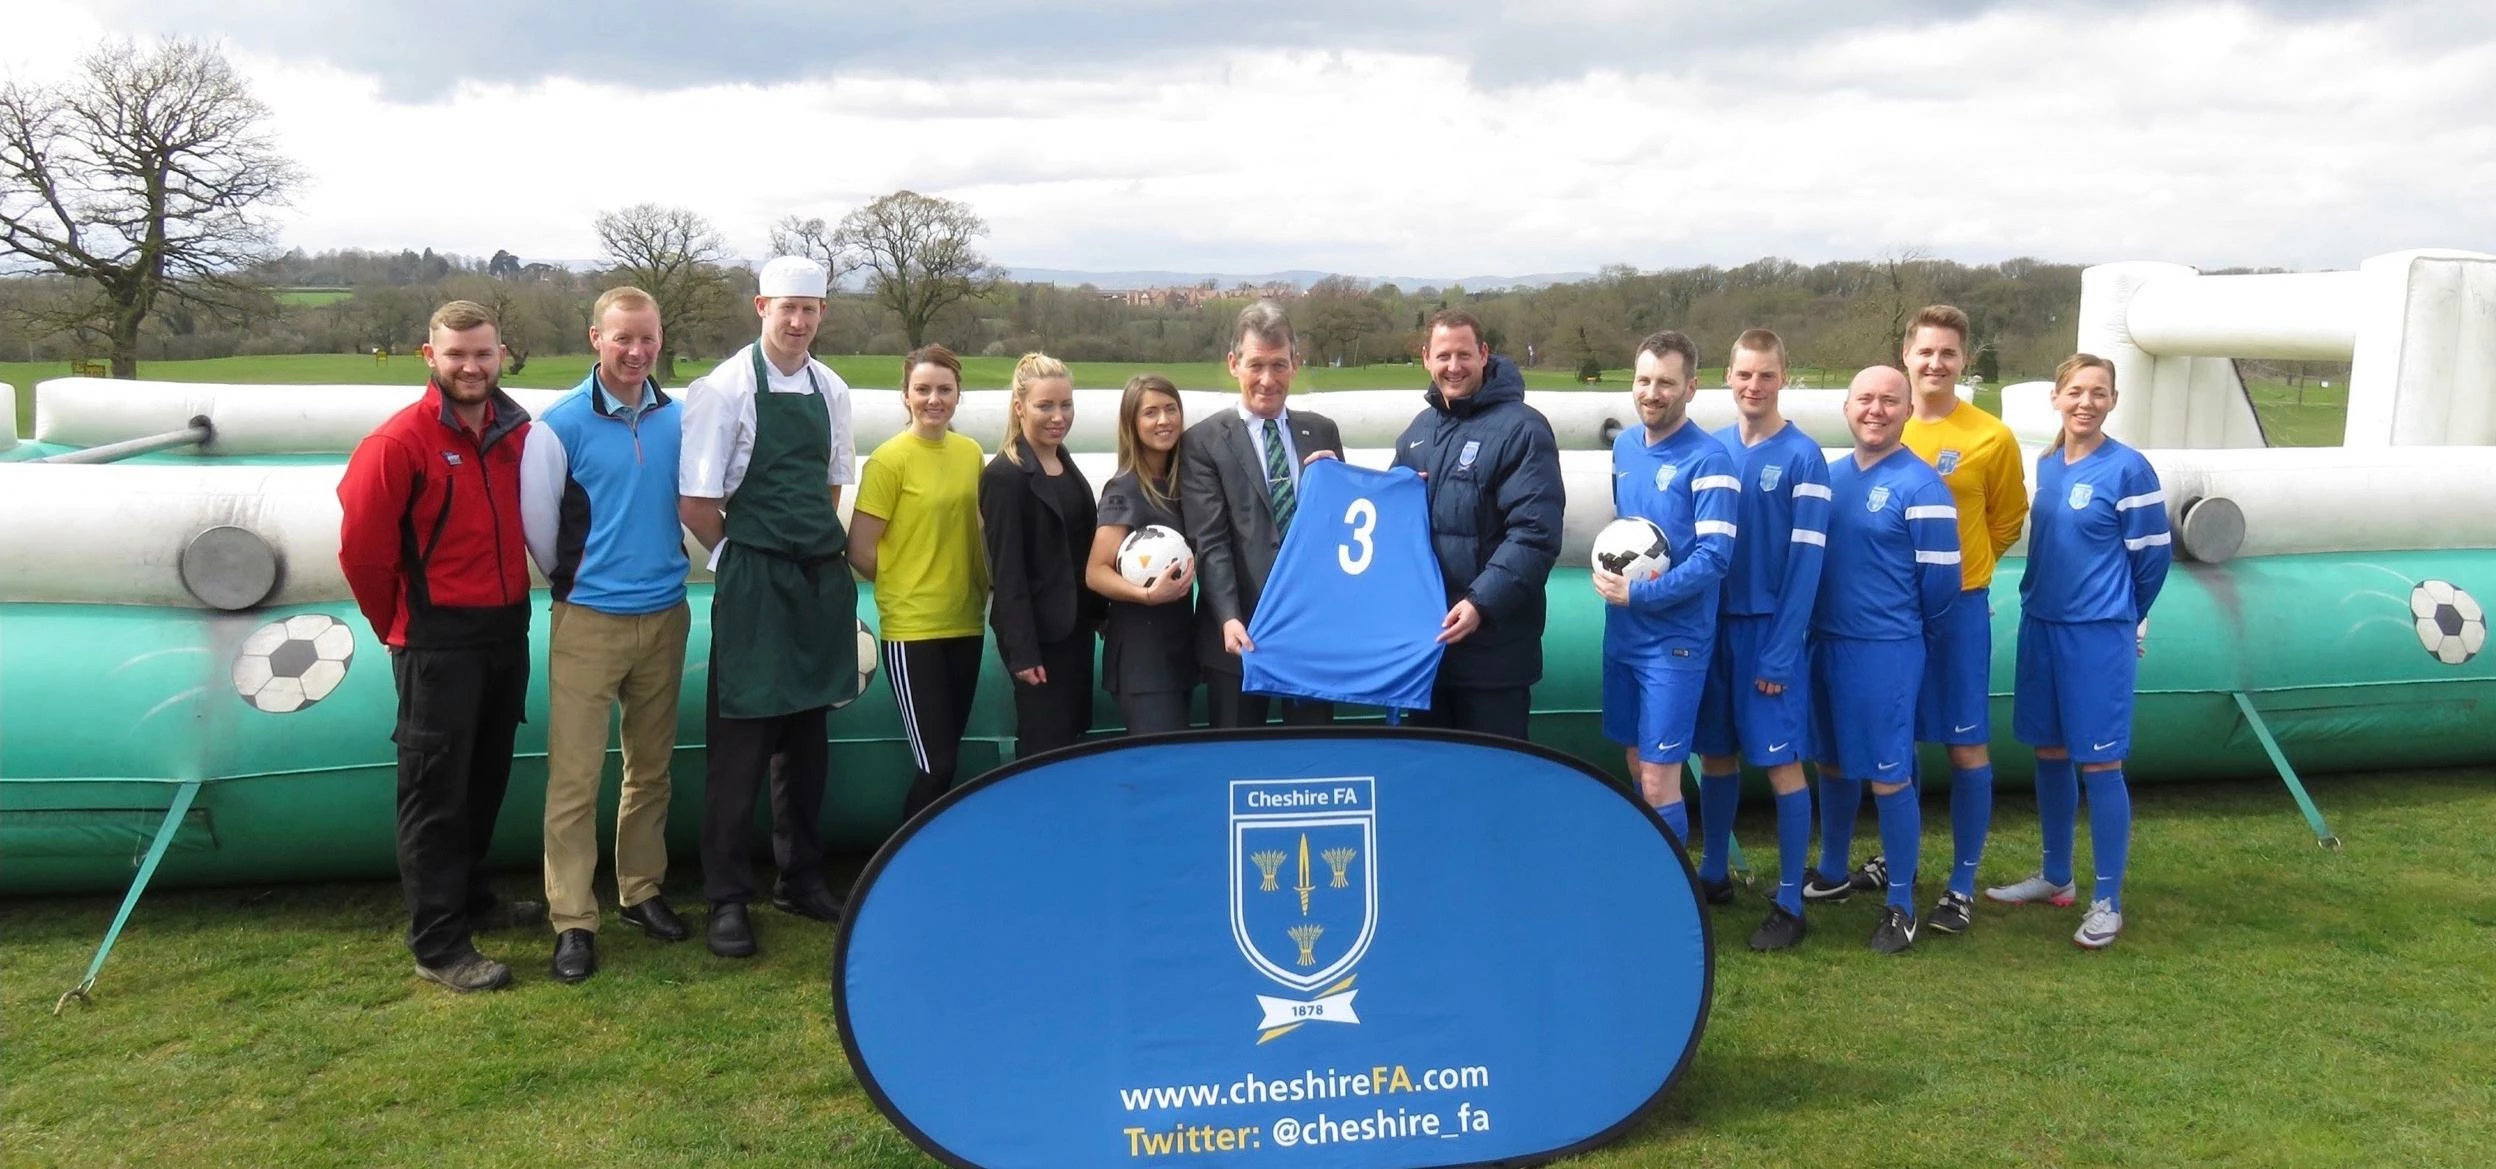 Cheshire FA's CEO, Simon Gerrard and Carden Park's General Manager, Hamish Ferguson together with th